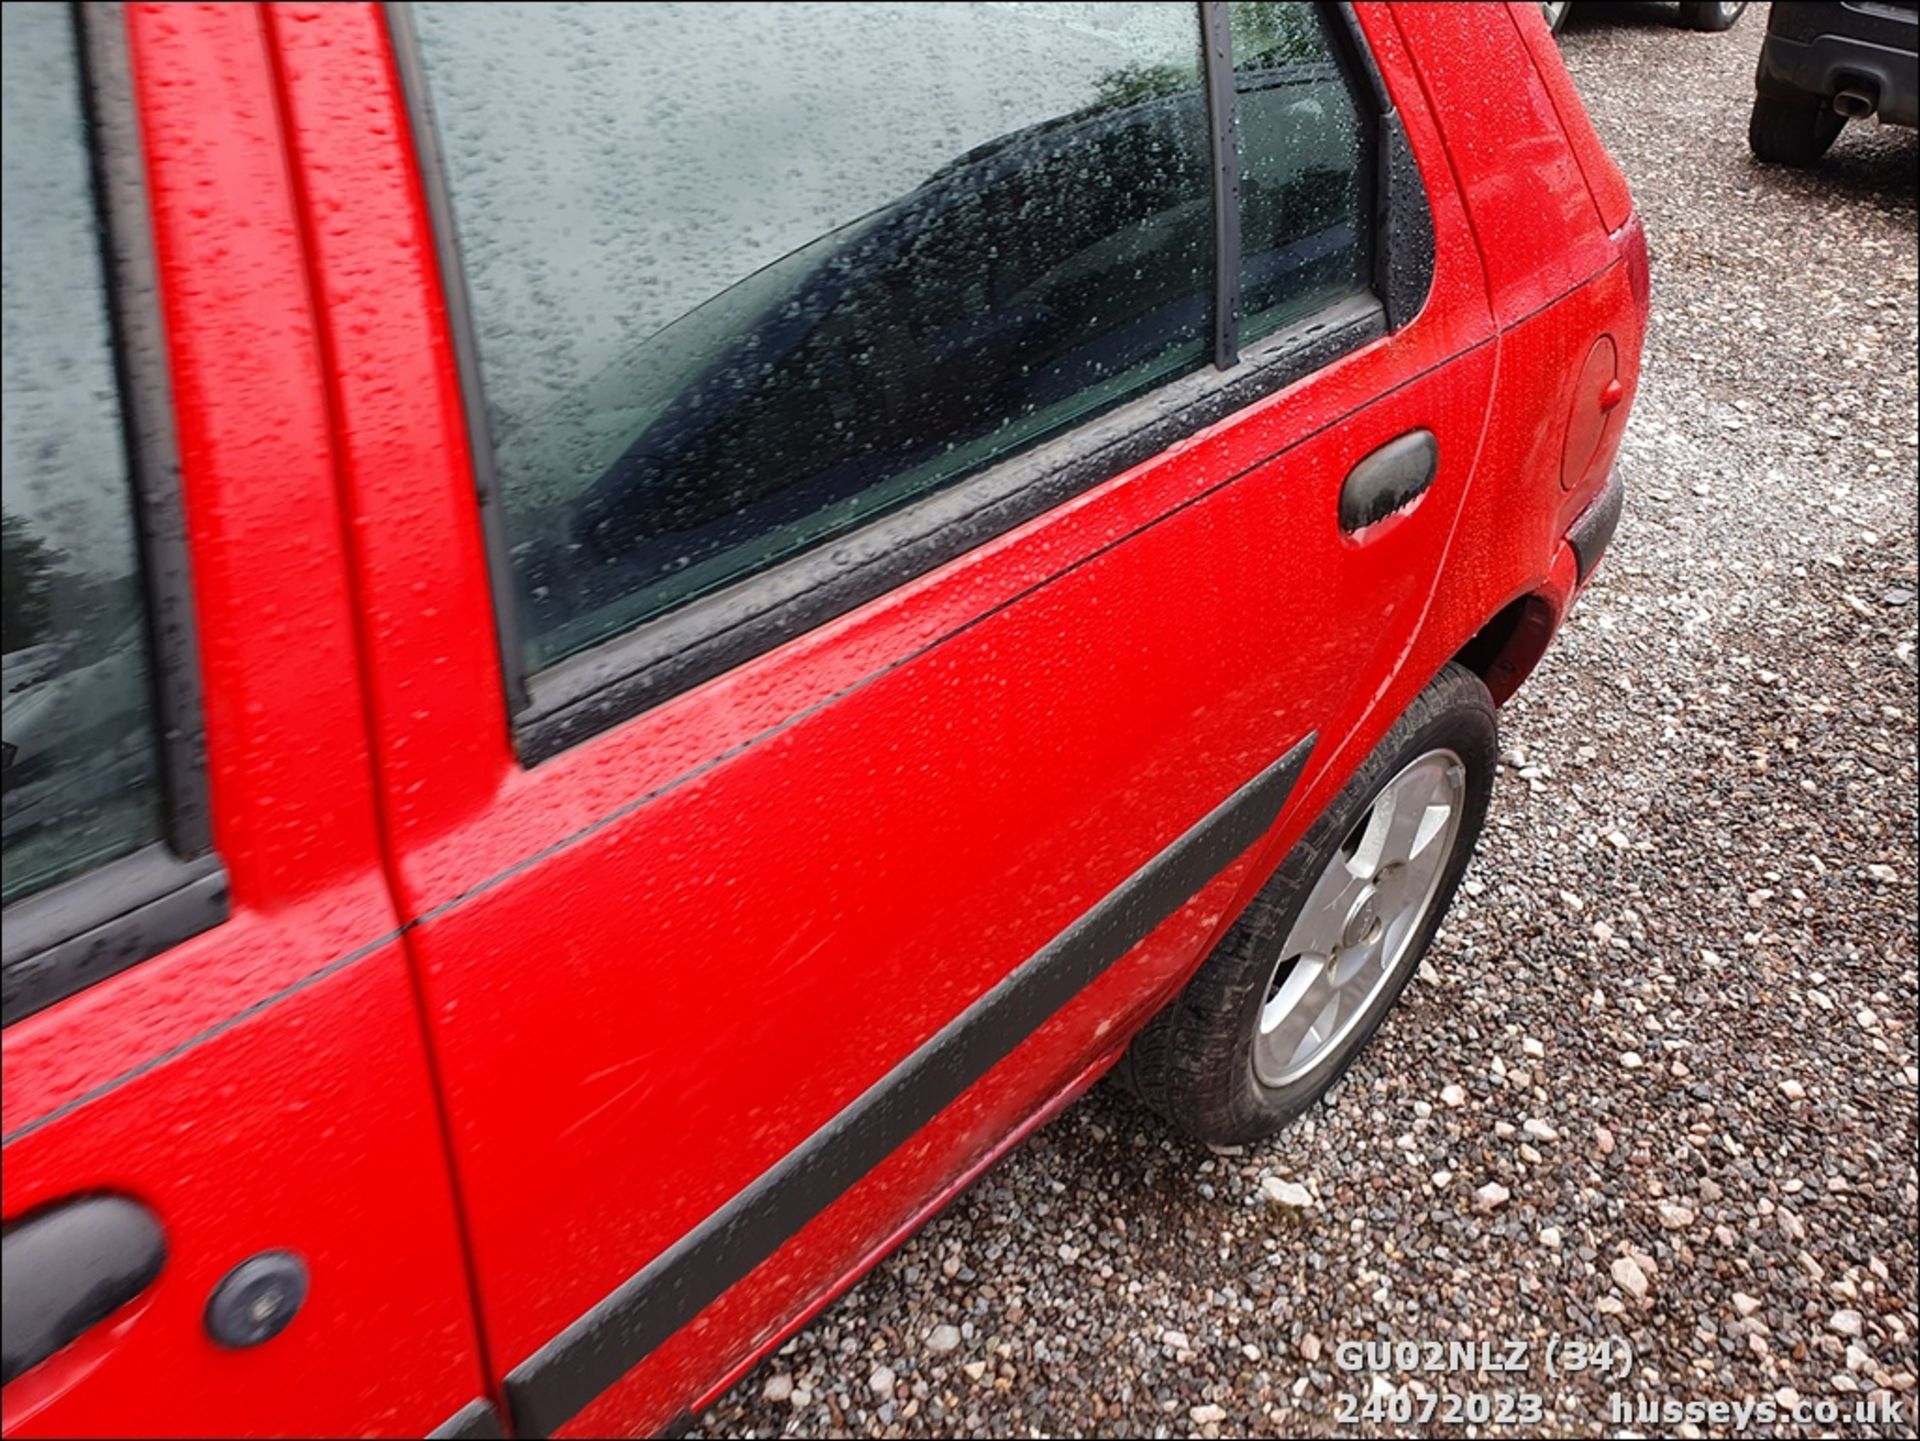 02/02 FORD FIESTA FREESTYLE - 1242cc 3dr Hatchback (Red) - Image 34 of 42